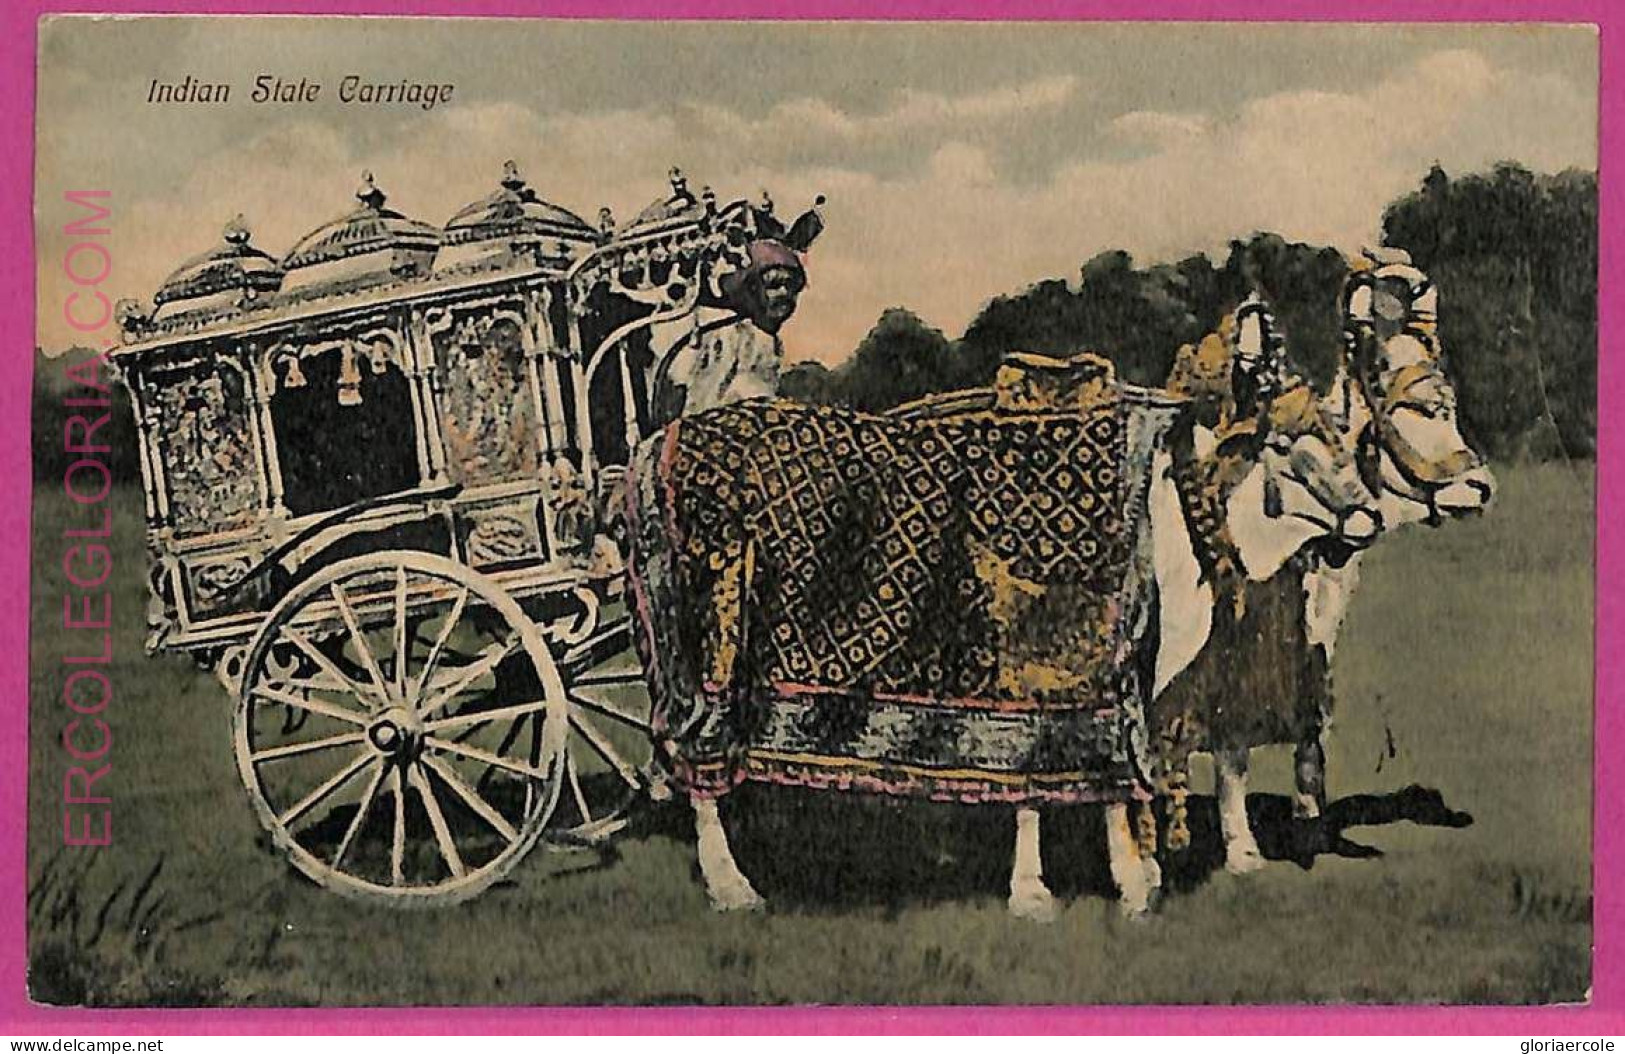 Ag3786  - INDIA - VINTAGE POSTCARD  - Ethnic, Indian State Carriage - Inde